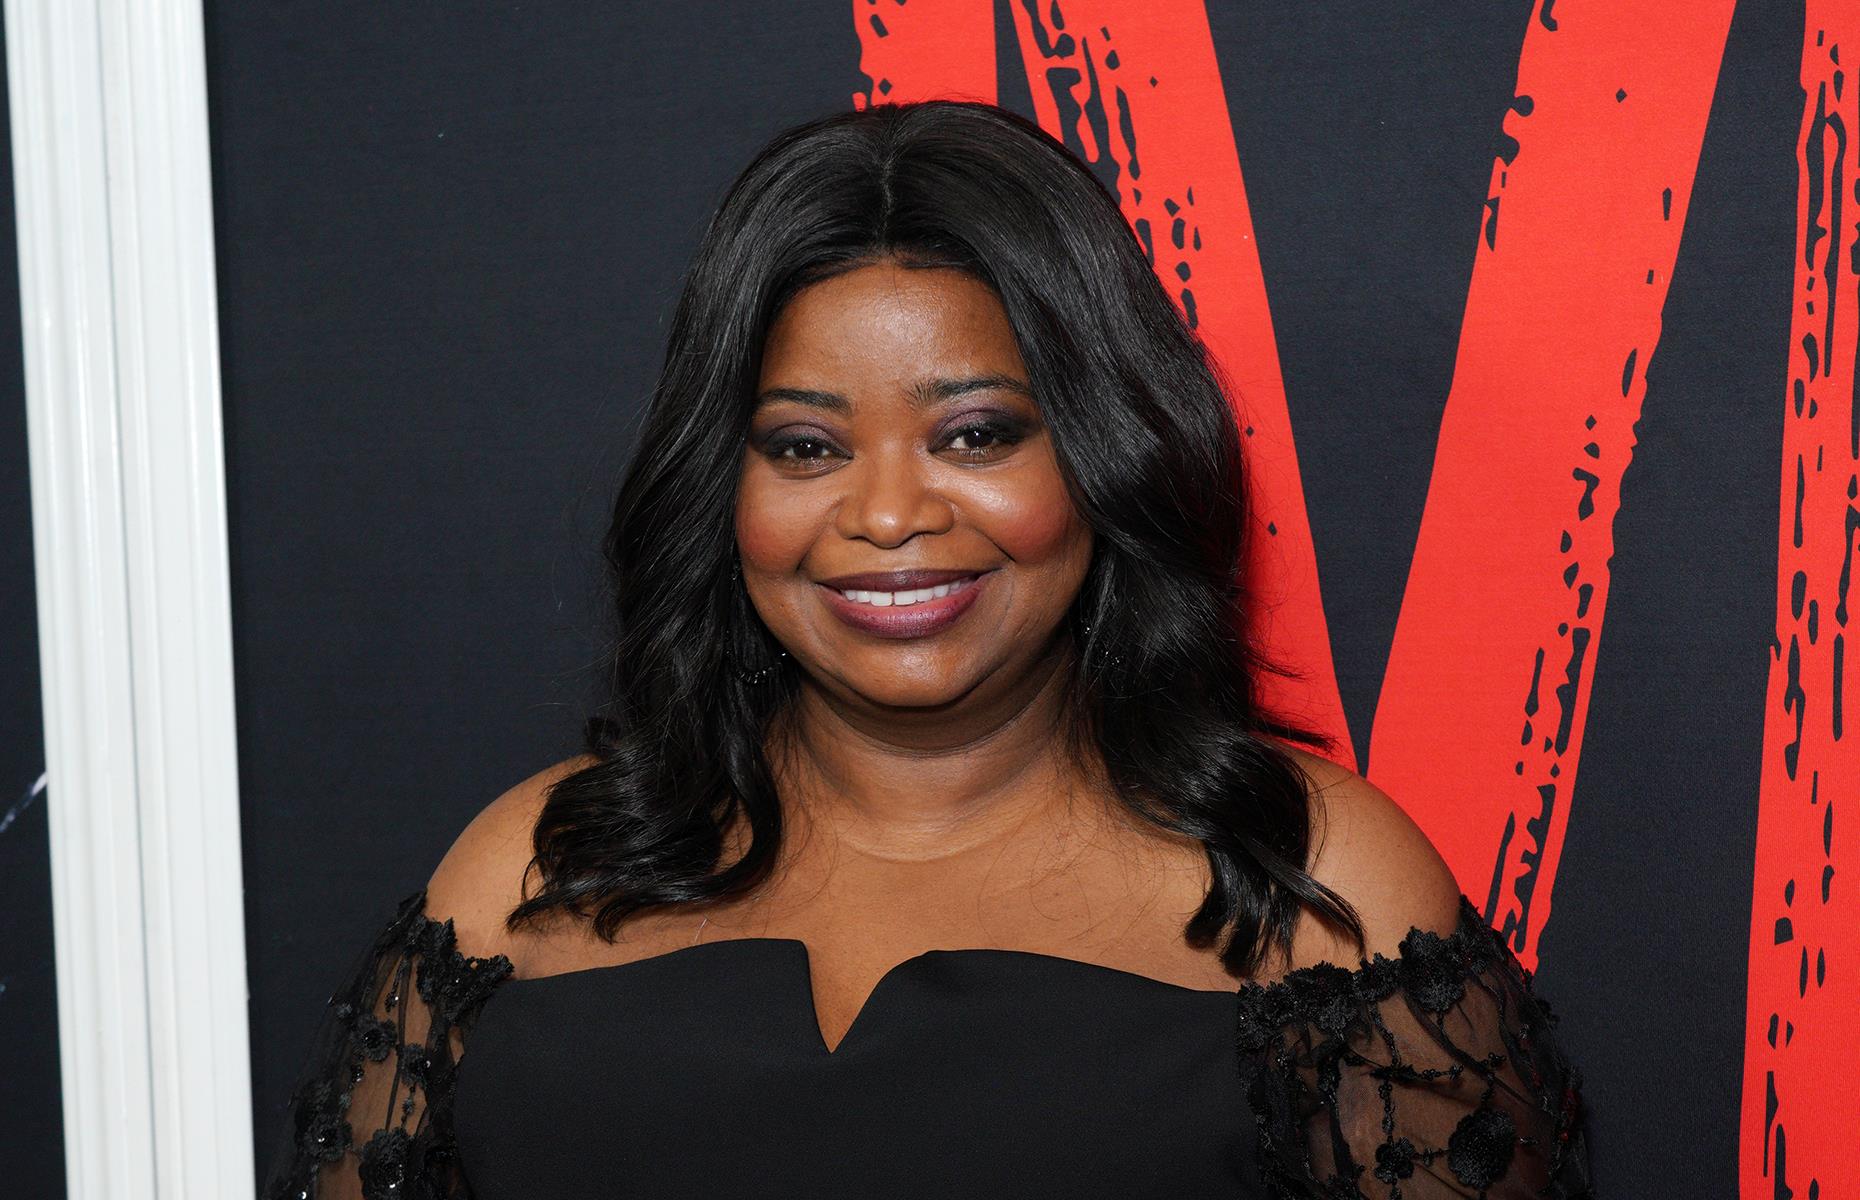 Octavia Spencer bought a movie screening for families on low incomes